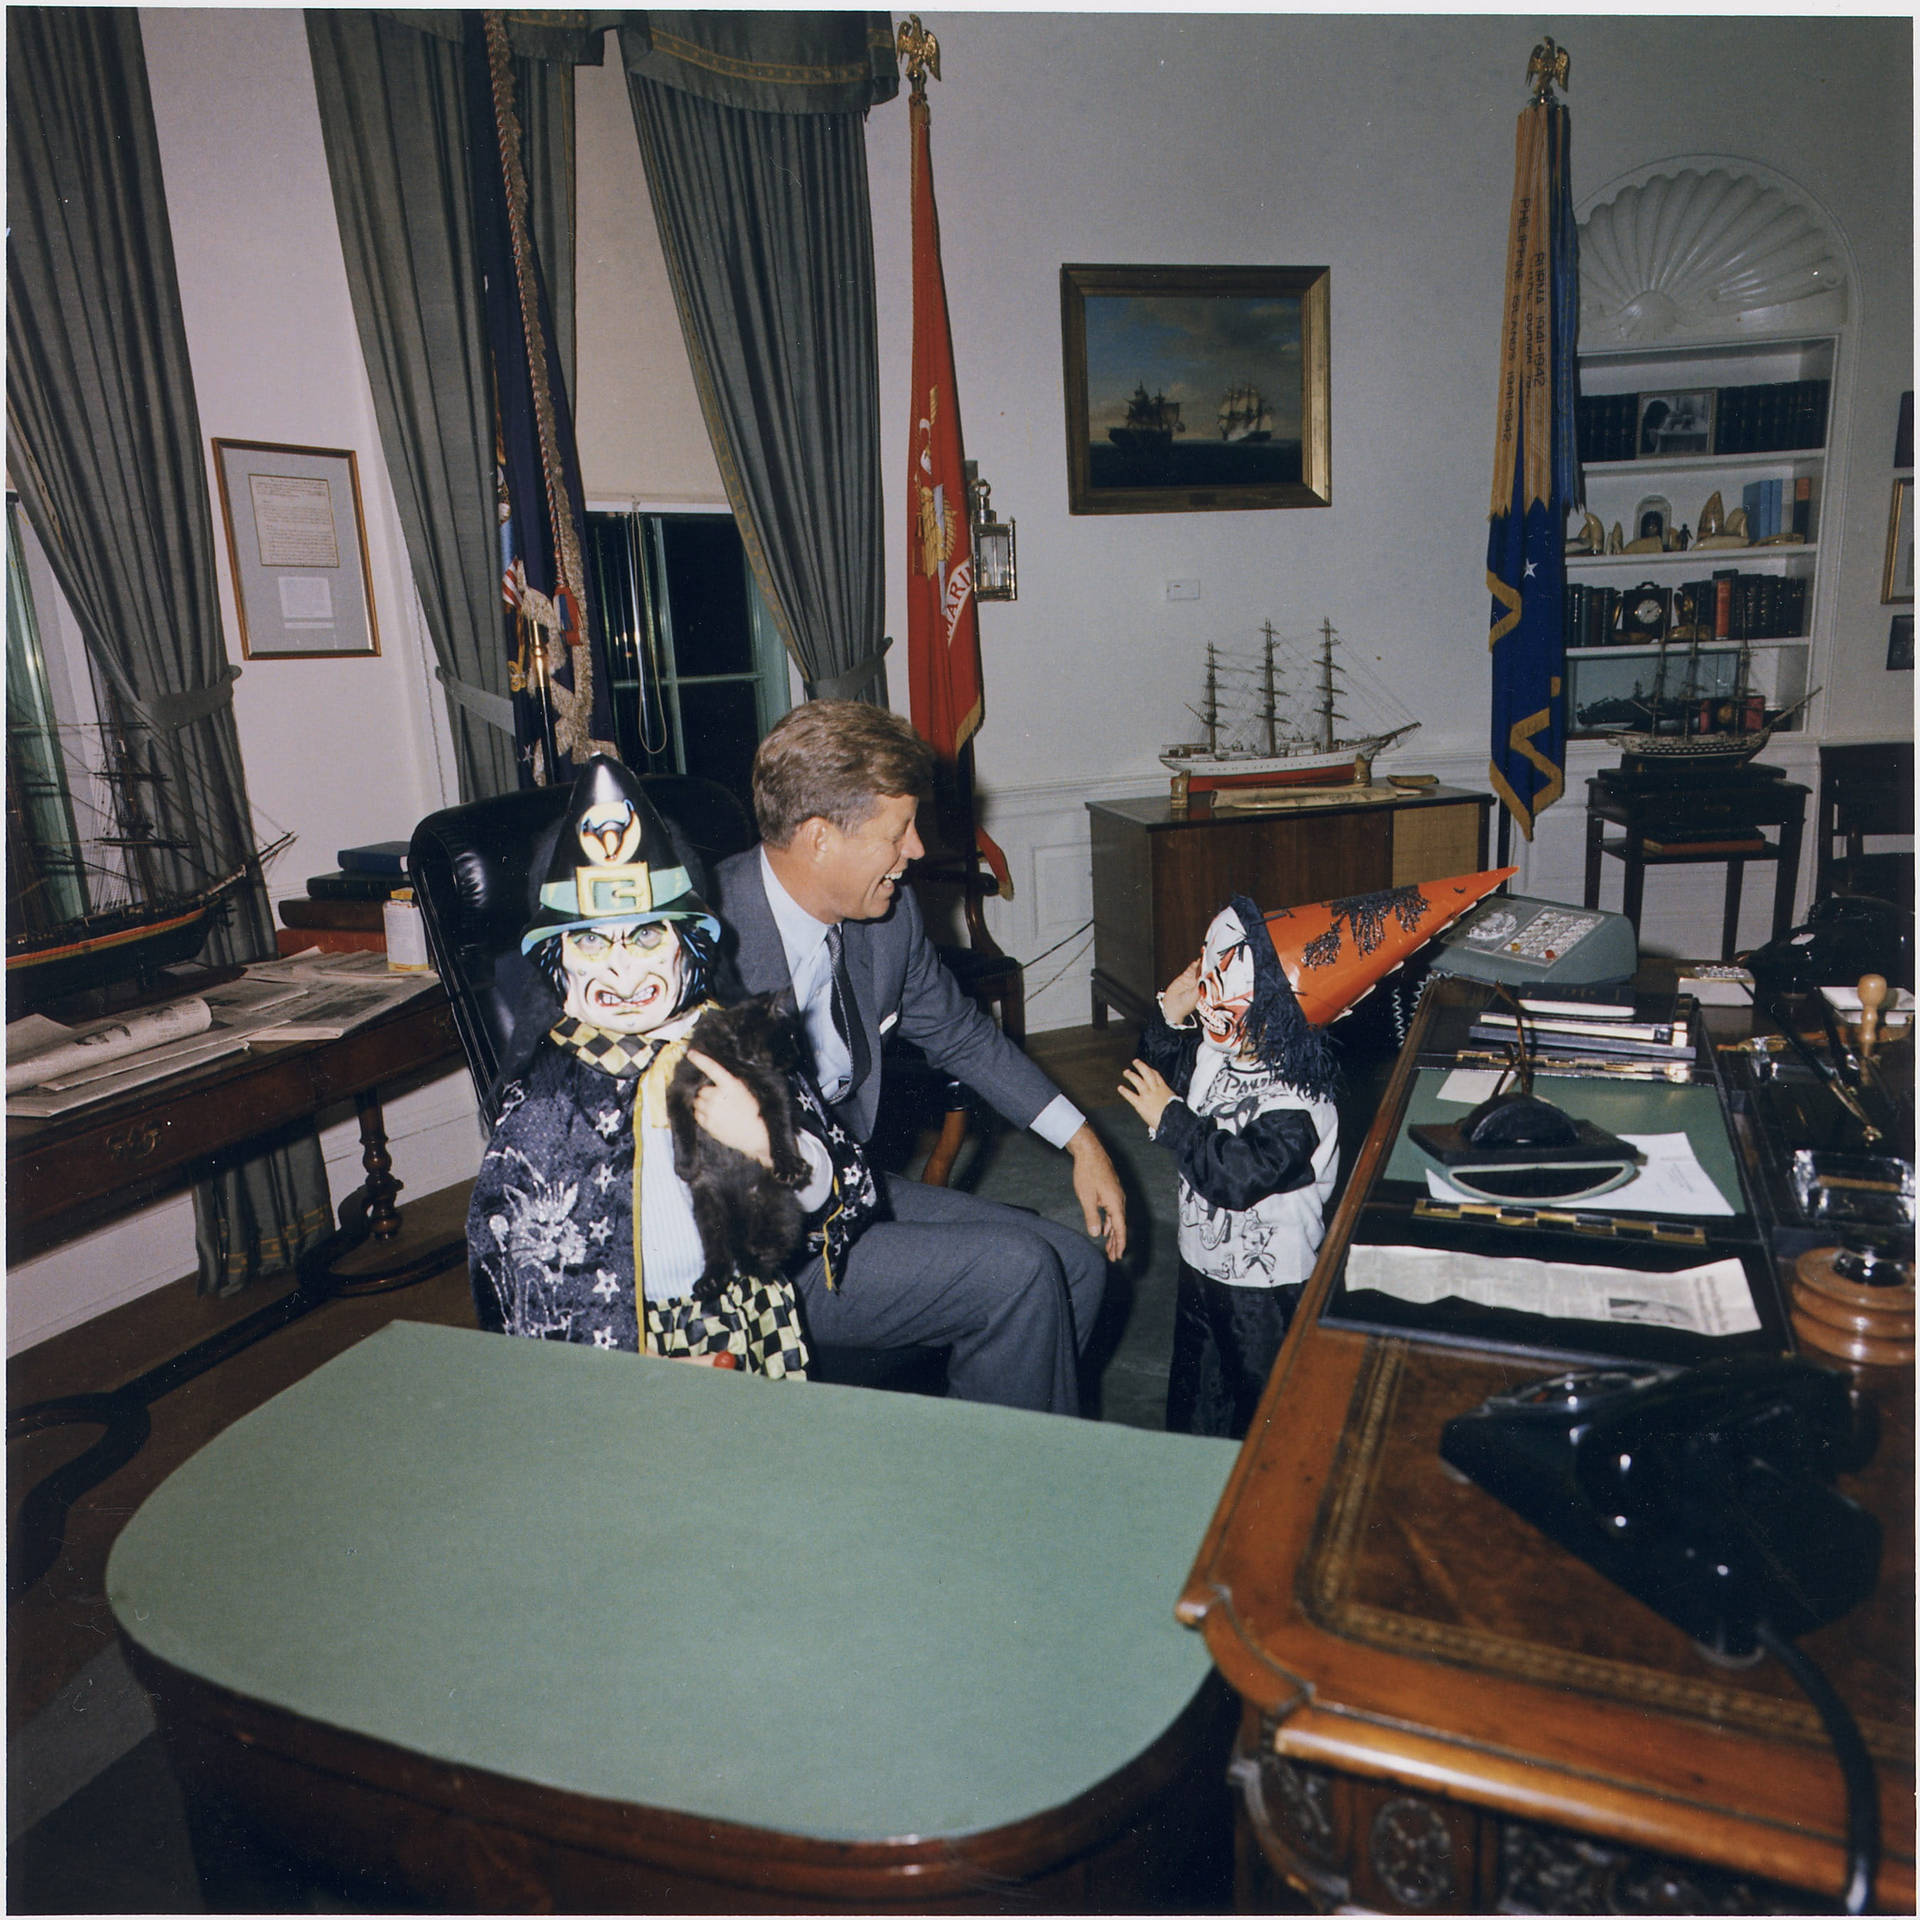 Halloween Party With John F. Kennedy